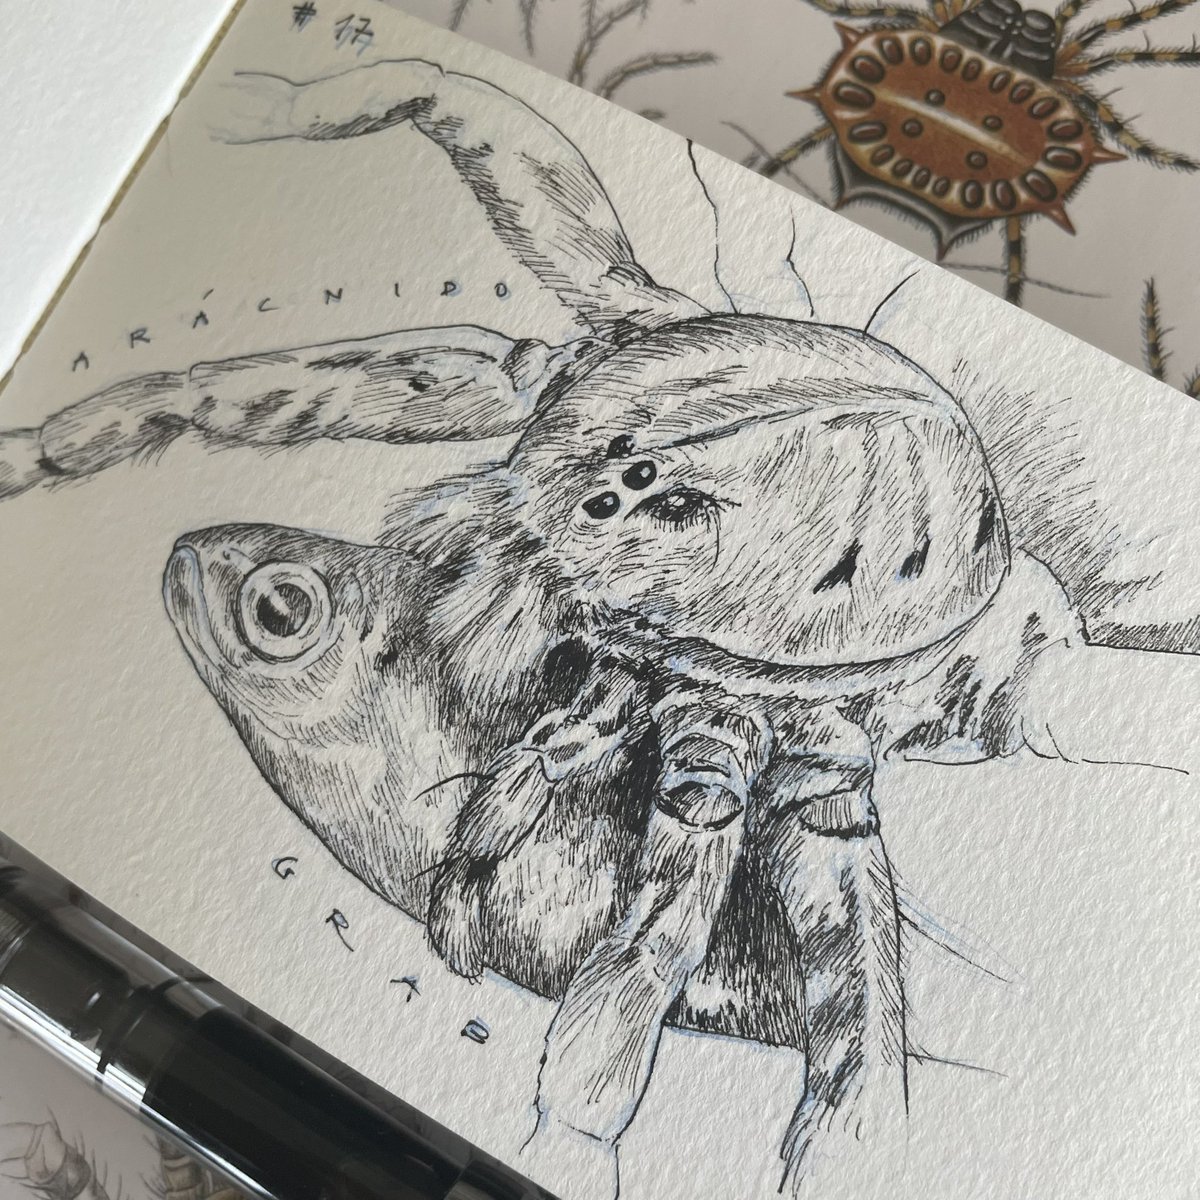 Day 17 // #Arácnido + #Grab // #Dolomedes

Two combined #inktober prompts!

@illustraciencia + @GNSIorg 

#scientificillustrator #scienceart #scientificillustration #Sciart #Sciartober #Illustraink23 #illustraciencia #inktober #natureillustration #spider #fish #fishingspider